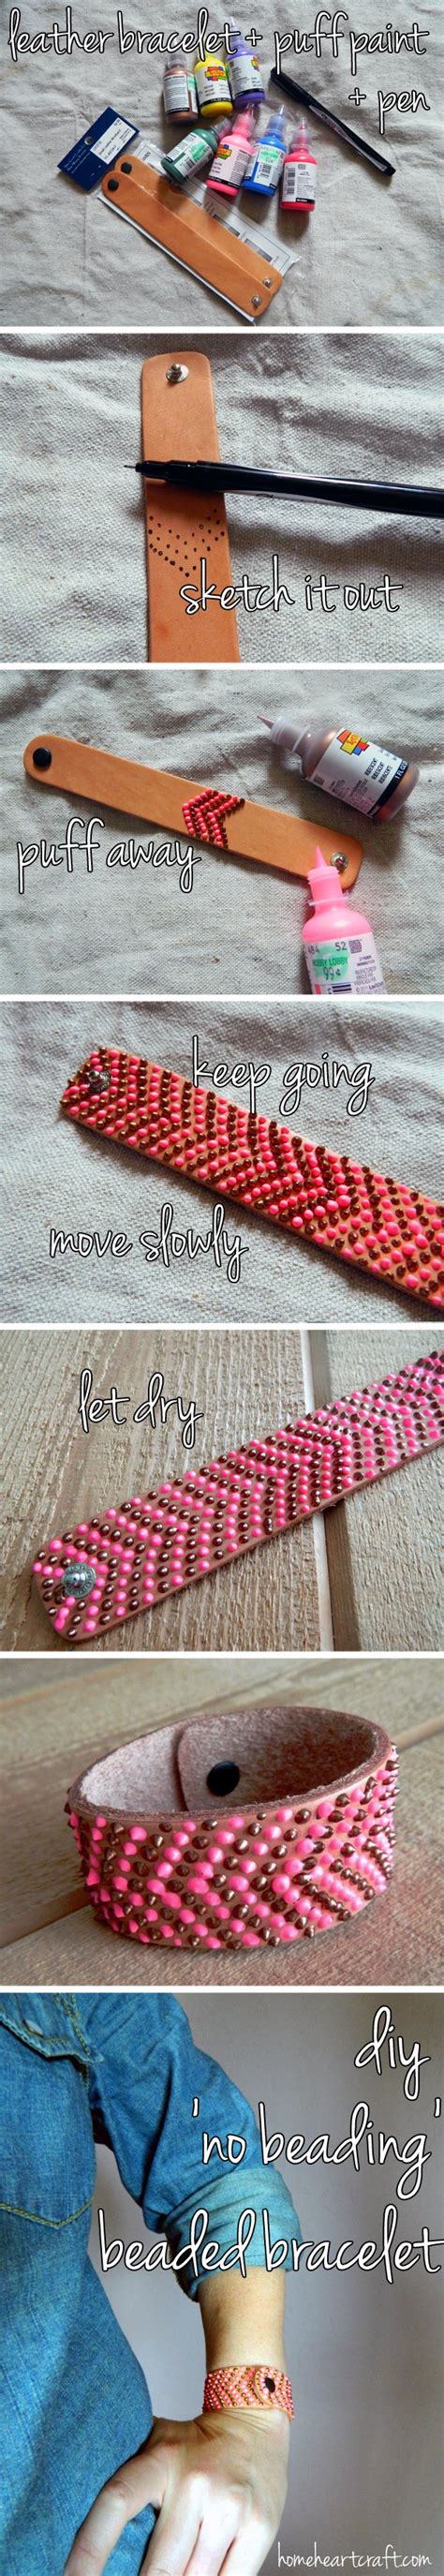 DIY: 15 Fashion Crafts Tutorials You Should Not MISS! | Styles Weekly